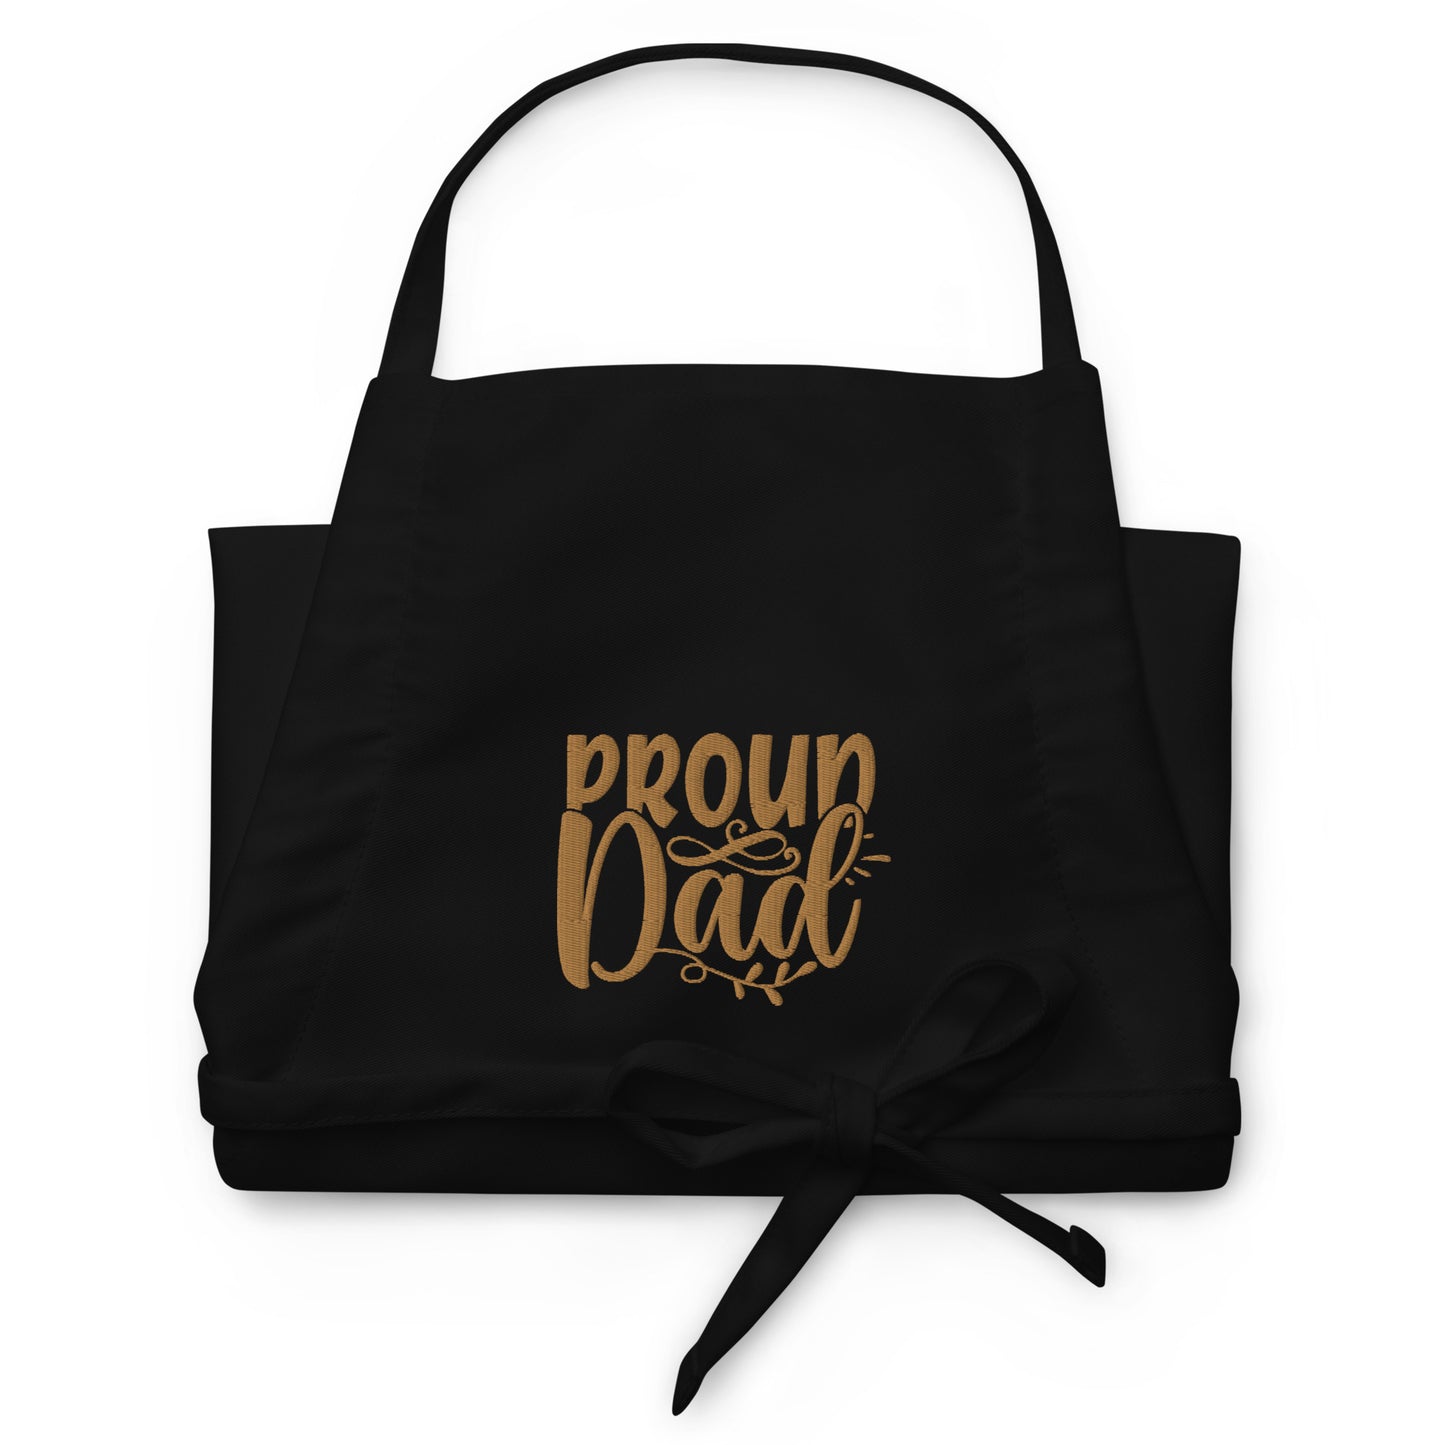 Proud Dad Embroidered Apron